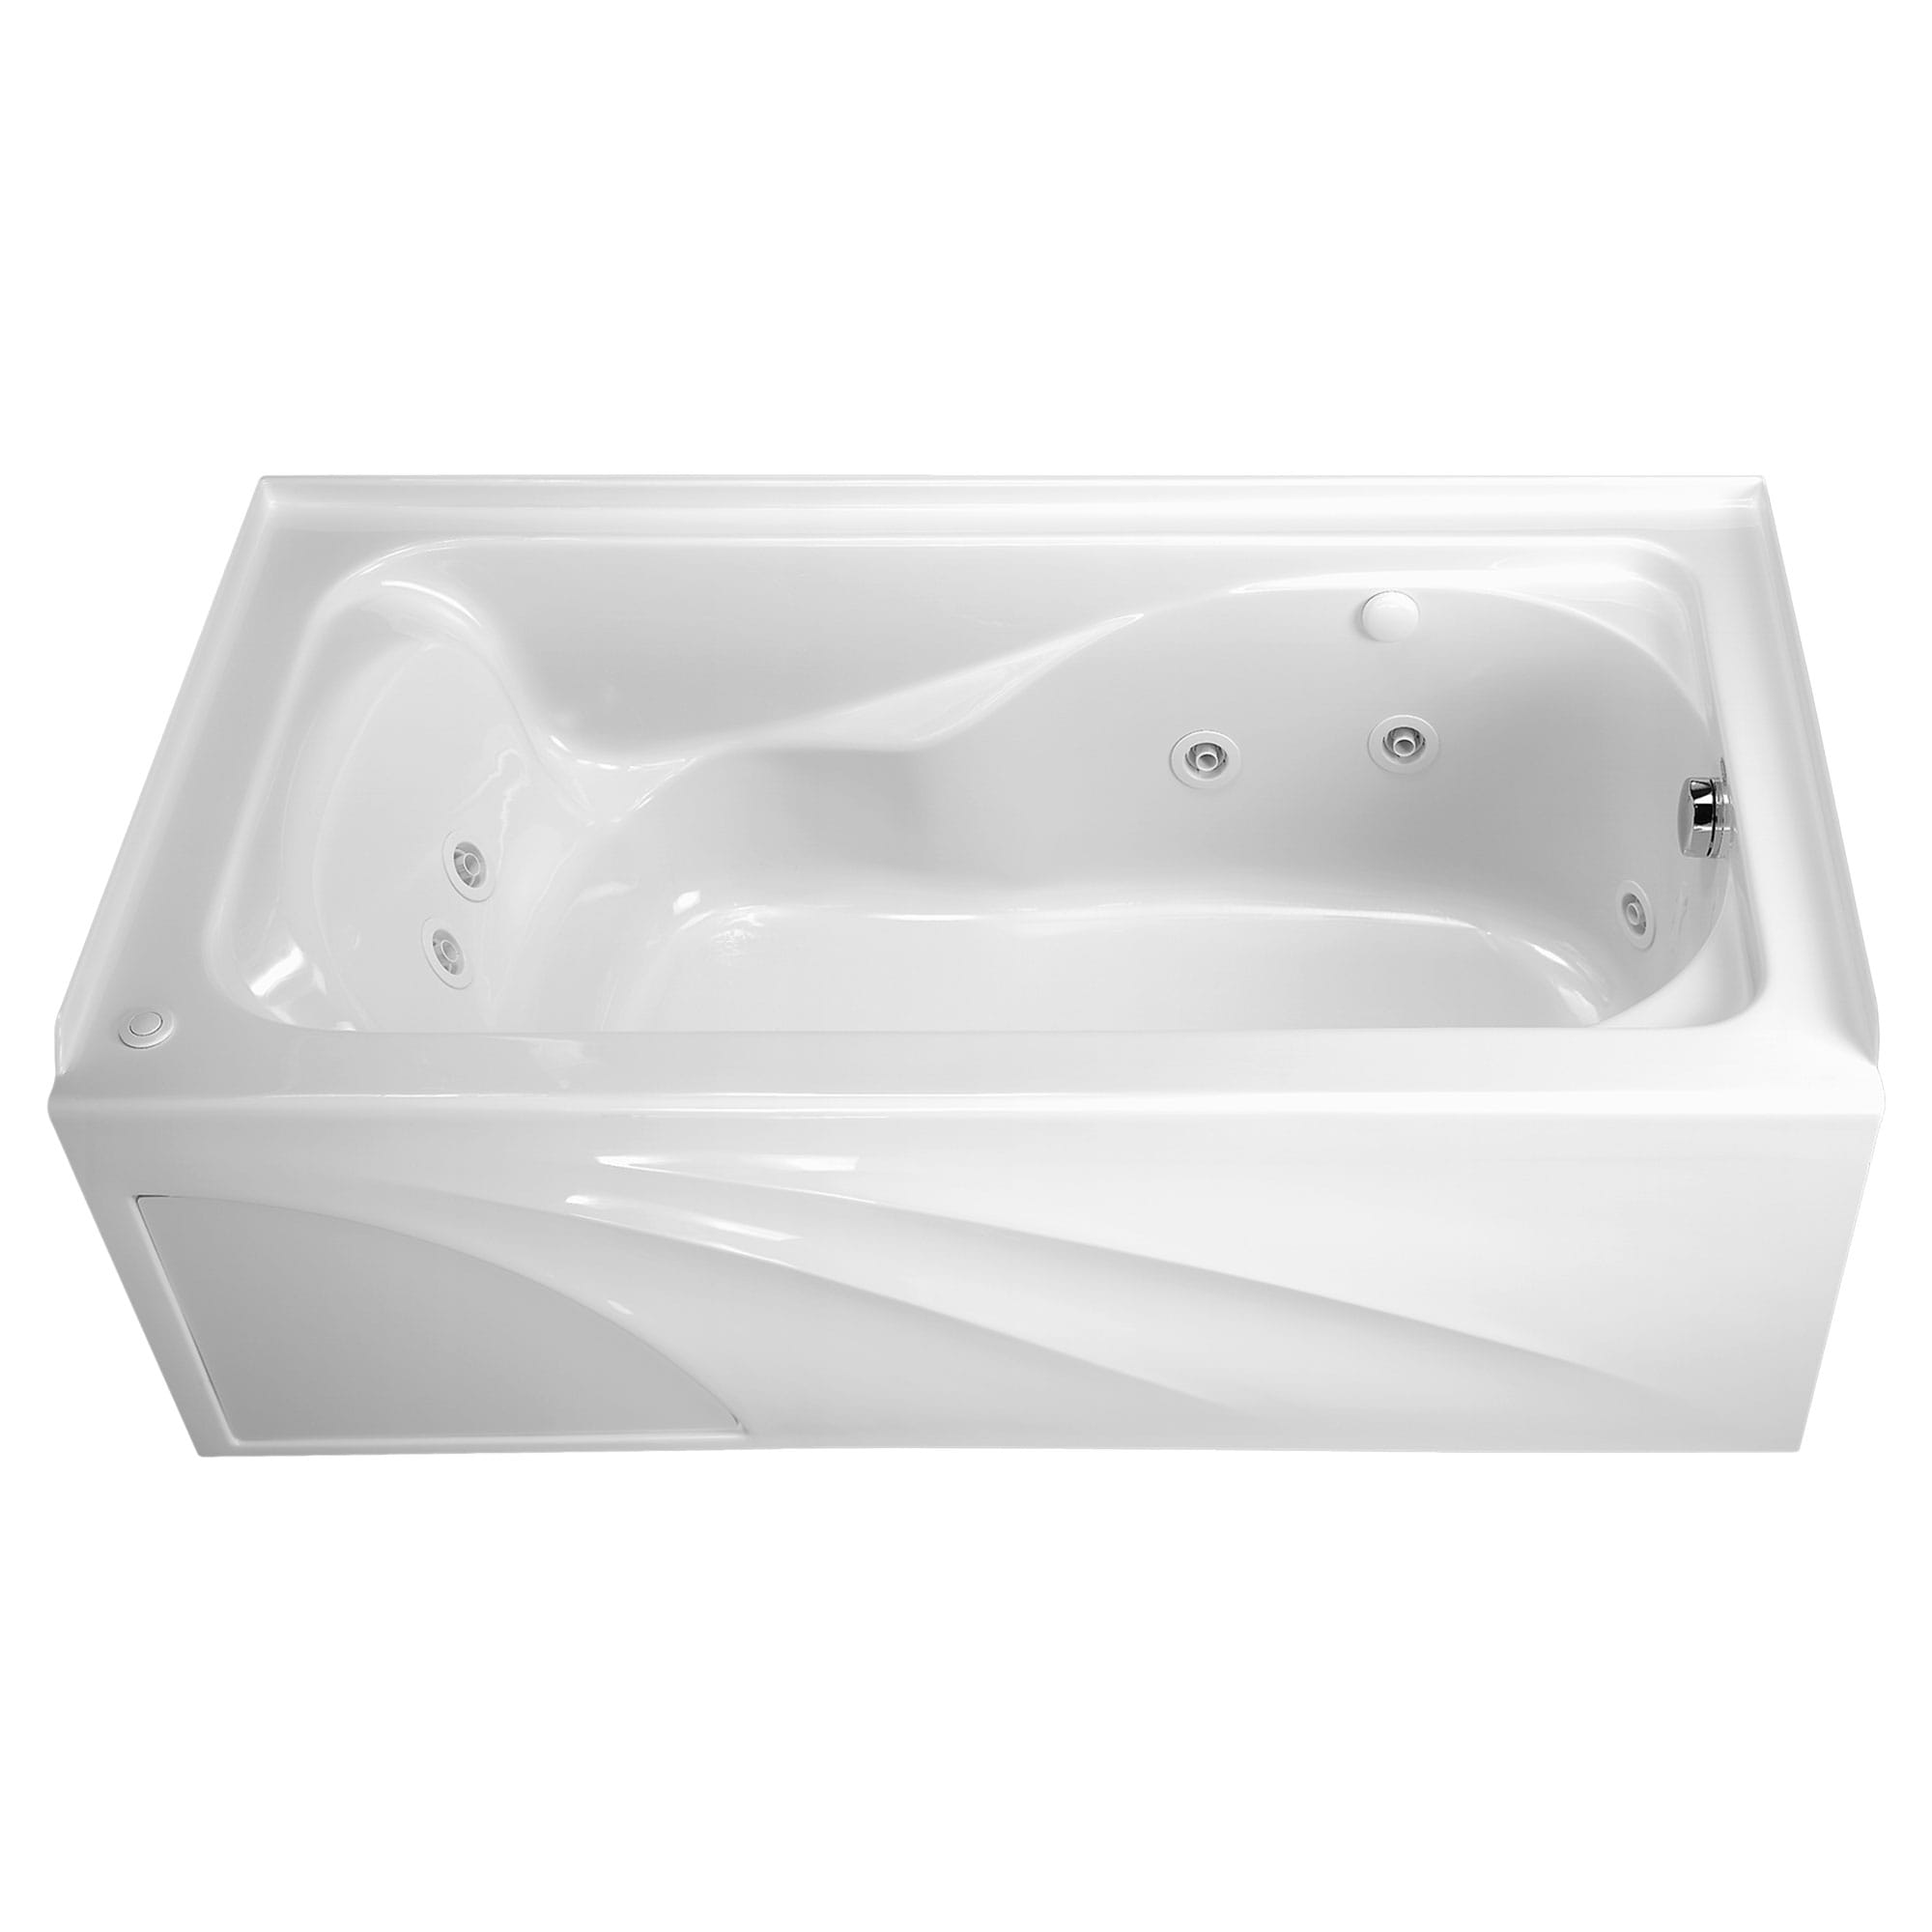 Cadet® 60 x 32-Inch Integral Apron Bathtub Right-Hand Outlet With EverClean® Hydromassage System